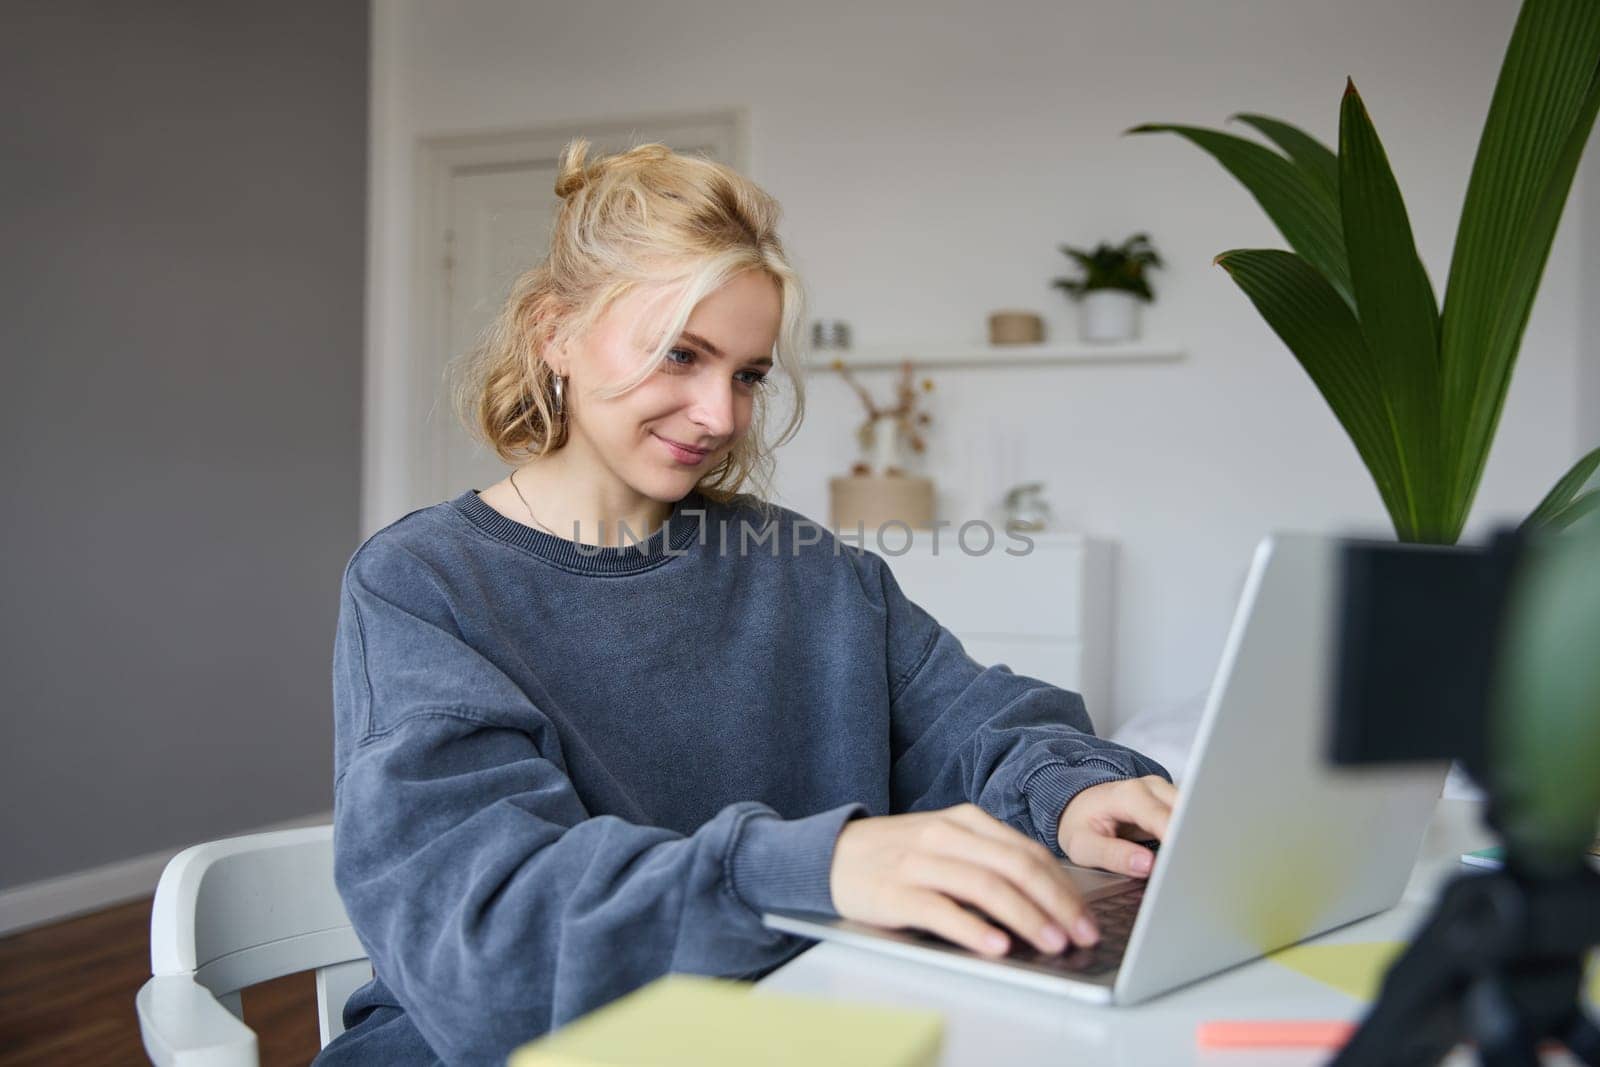 Portrait of young blond woman, female college student works from home on assignment, uses laptop, studies remotely, sits in room in front of computer.